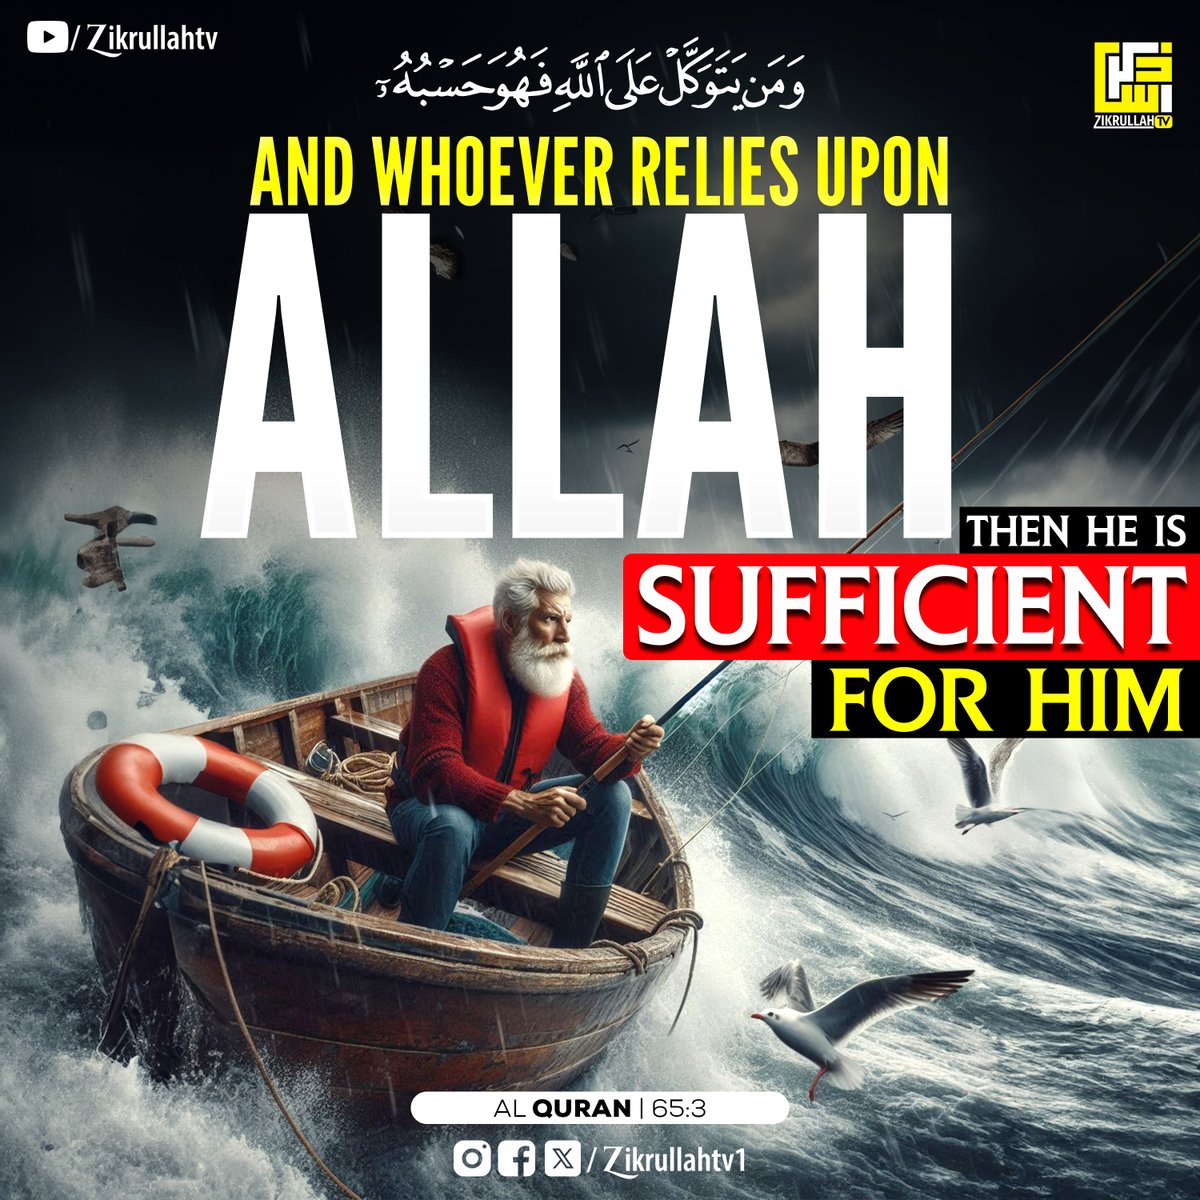 And whoever relies upon Allah - then He is sufficient for him. ( Al-Quran 65:3)
Watch Surah Al Mu'minun : youtu.be/nsnxfLRRY_s

#quran #quranquote #quranmajeed #quranverses #quranquotes #QuranChallenge #quranrecitation #QuranTogetherChallenge #quranletteringchallenge